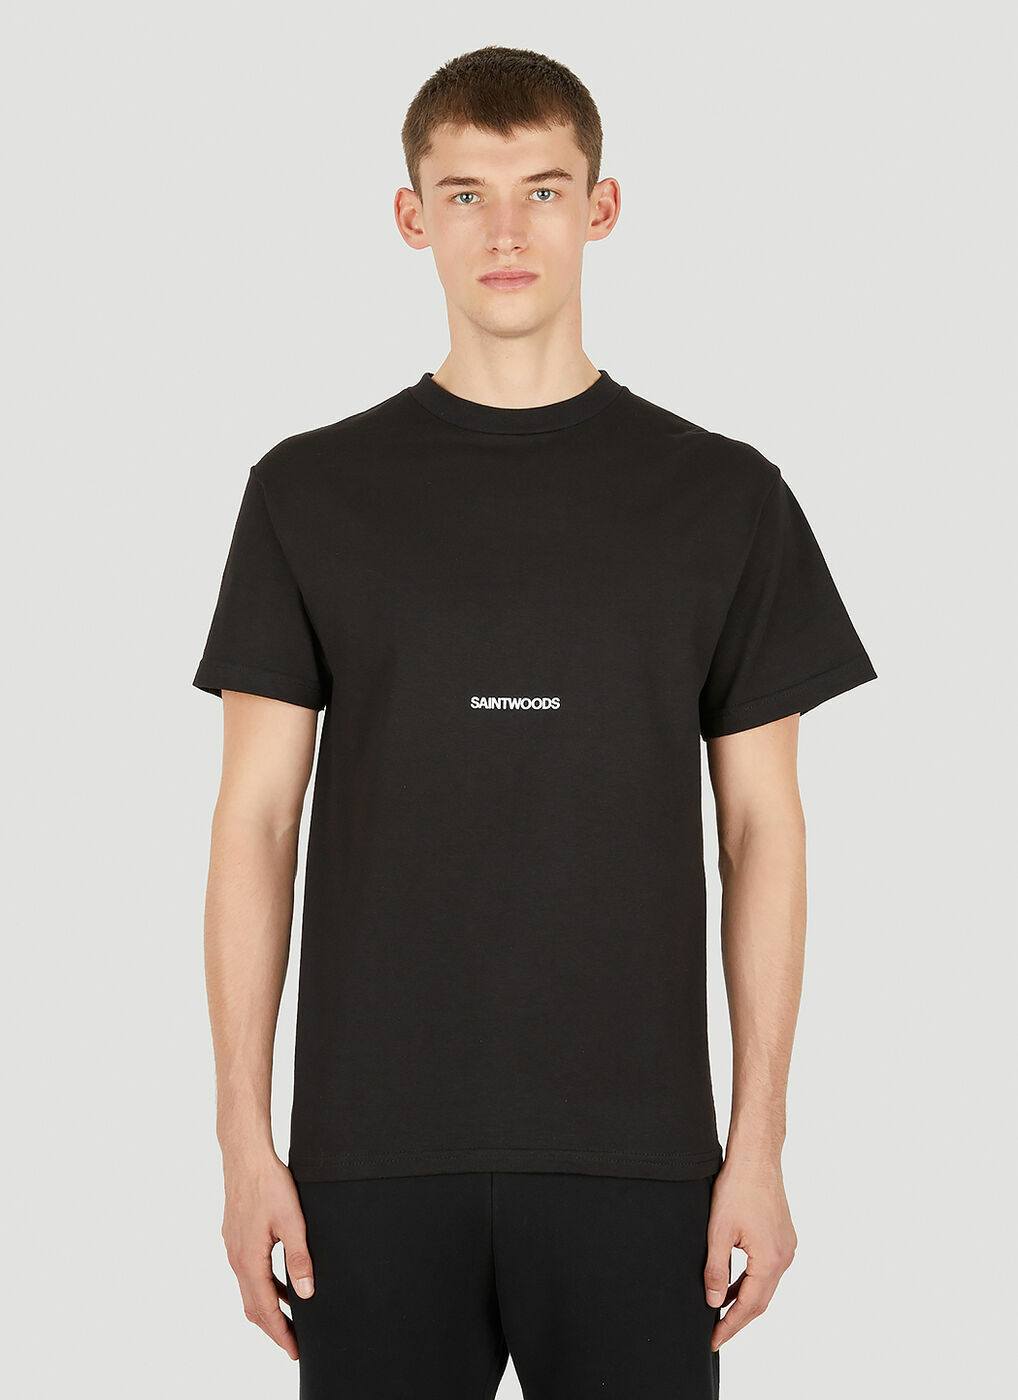 Logo Embroidery T-Shirt in Black Saintwoods